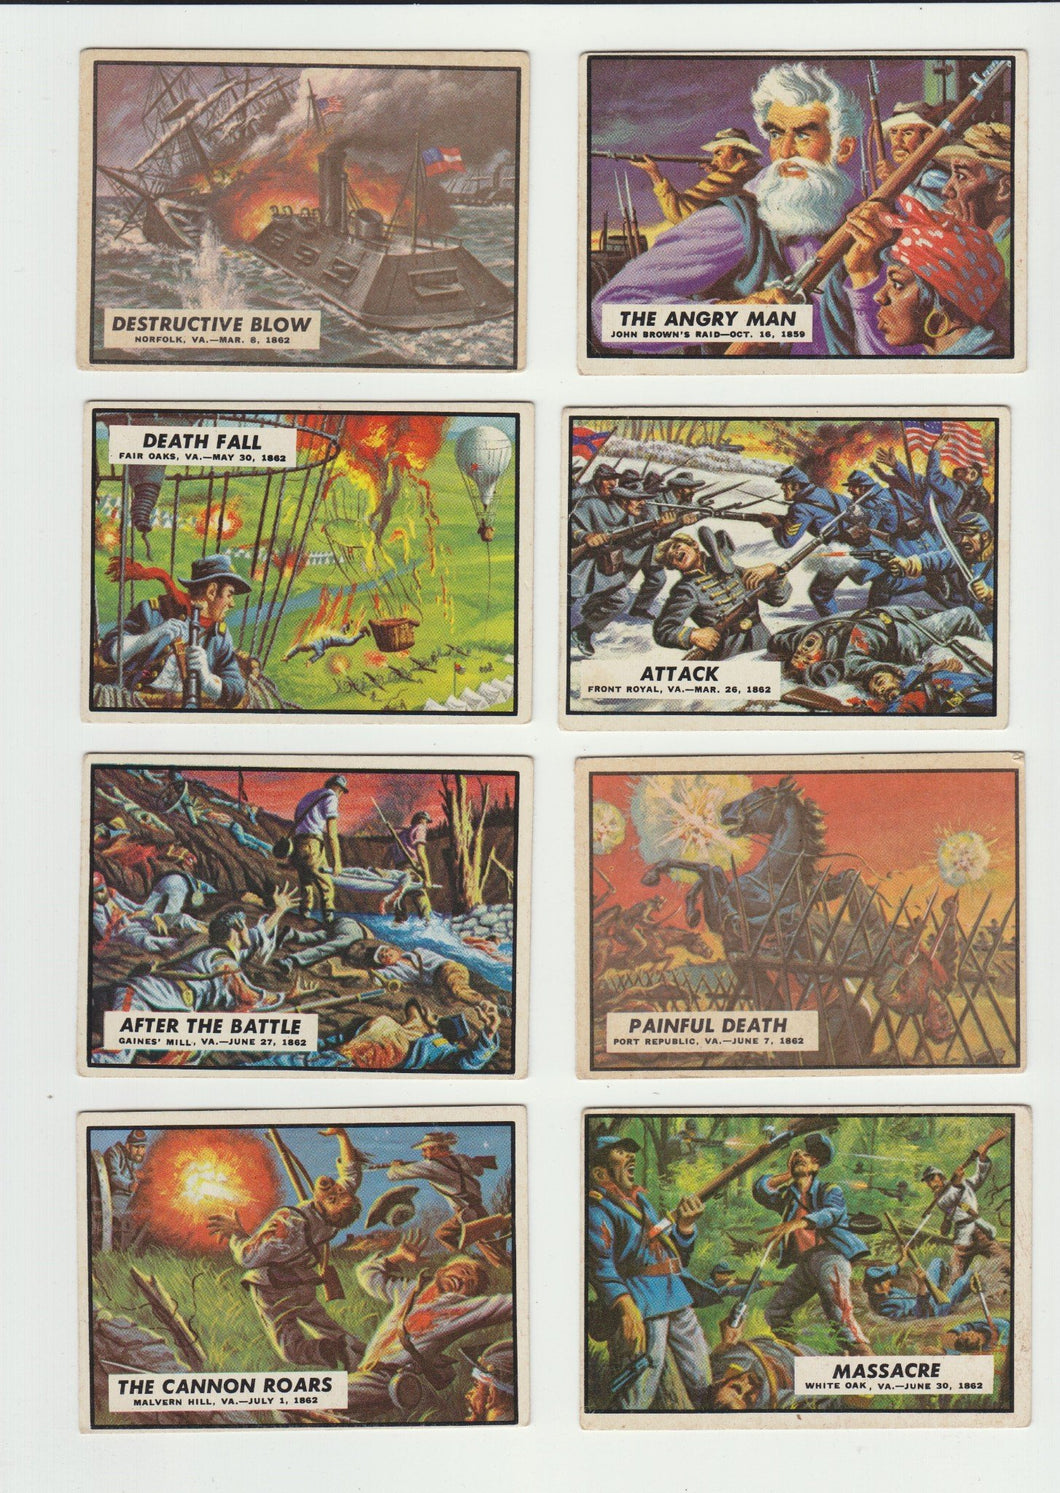 30 x 1962 Topps Civil War News Card Lot w/ Cards Listed in Description - VG+ to